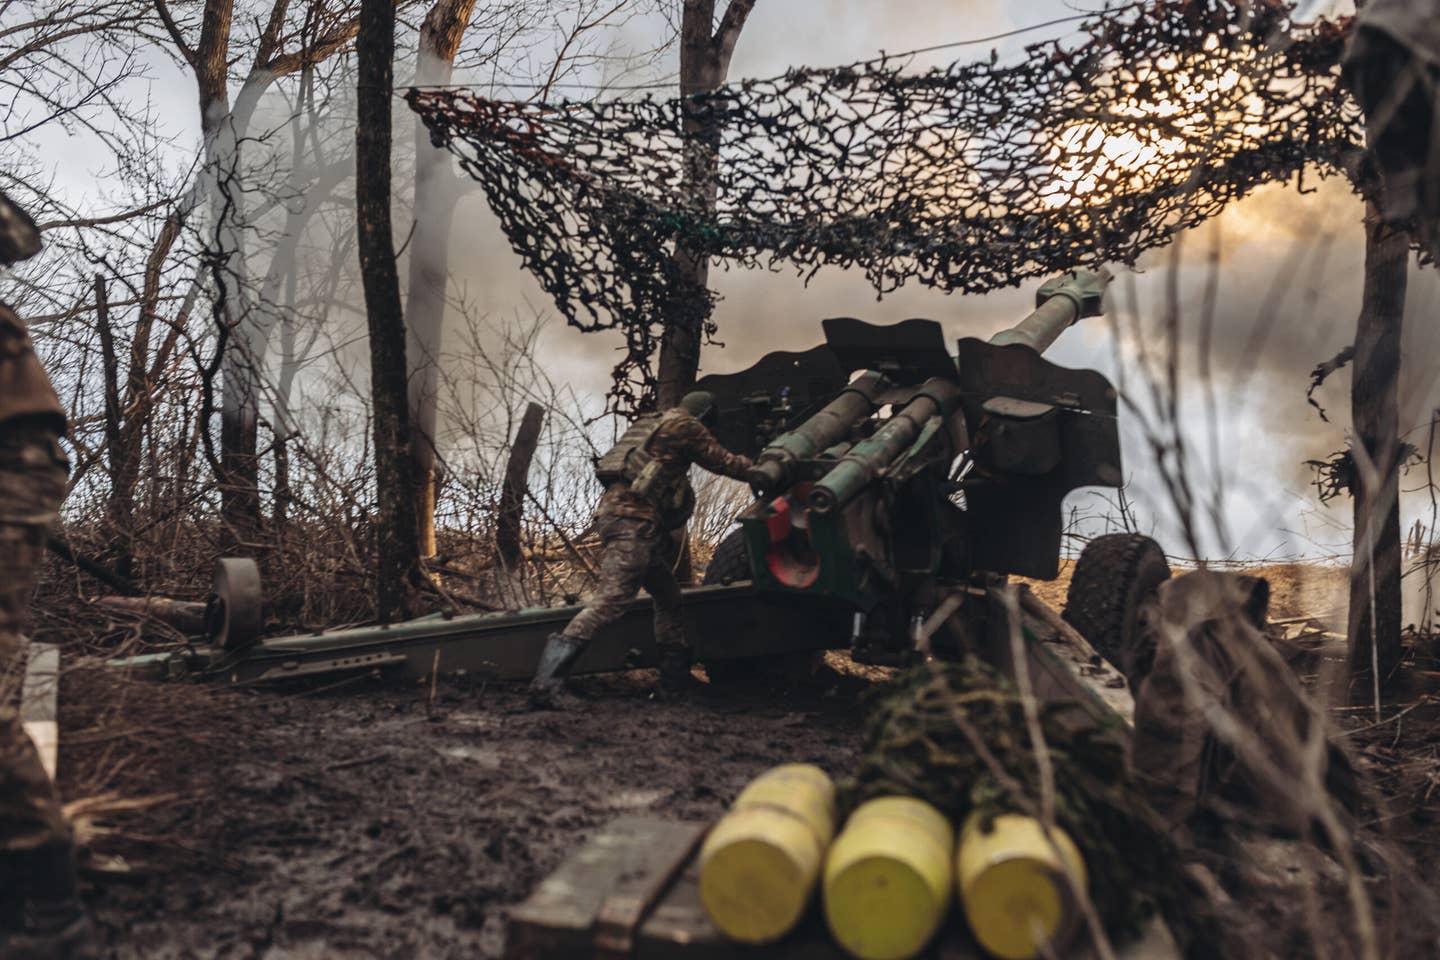 Ukrainian soldiers fire artillery on the Donbas frontline. The OF-25T munitions can be seen in the foreground.<em> Photo by Diego Herrera Carcedo/Anadolu Agency via Getty Images</em>